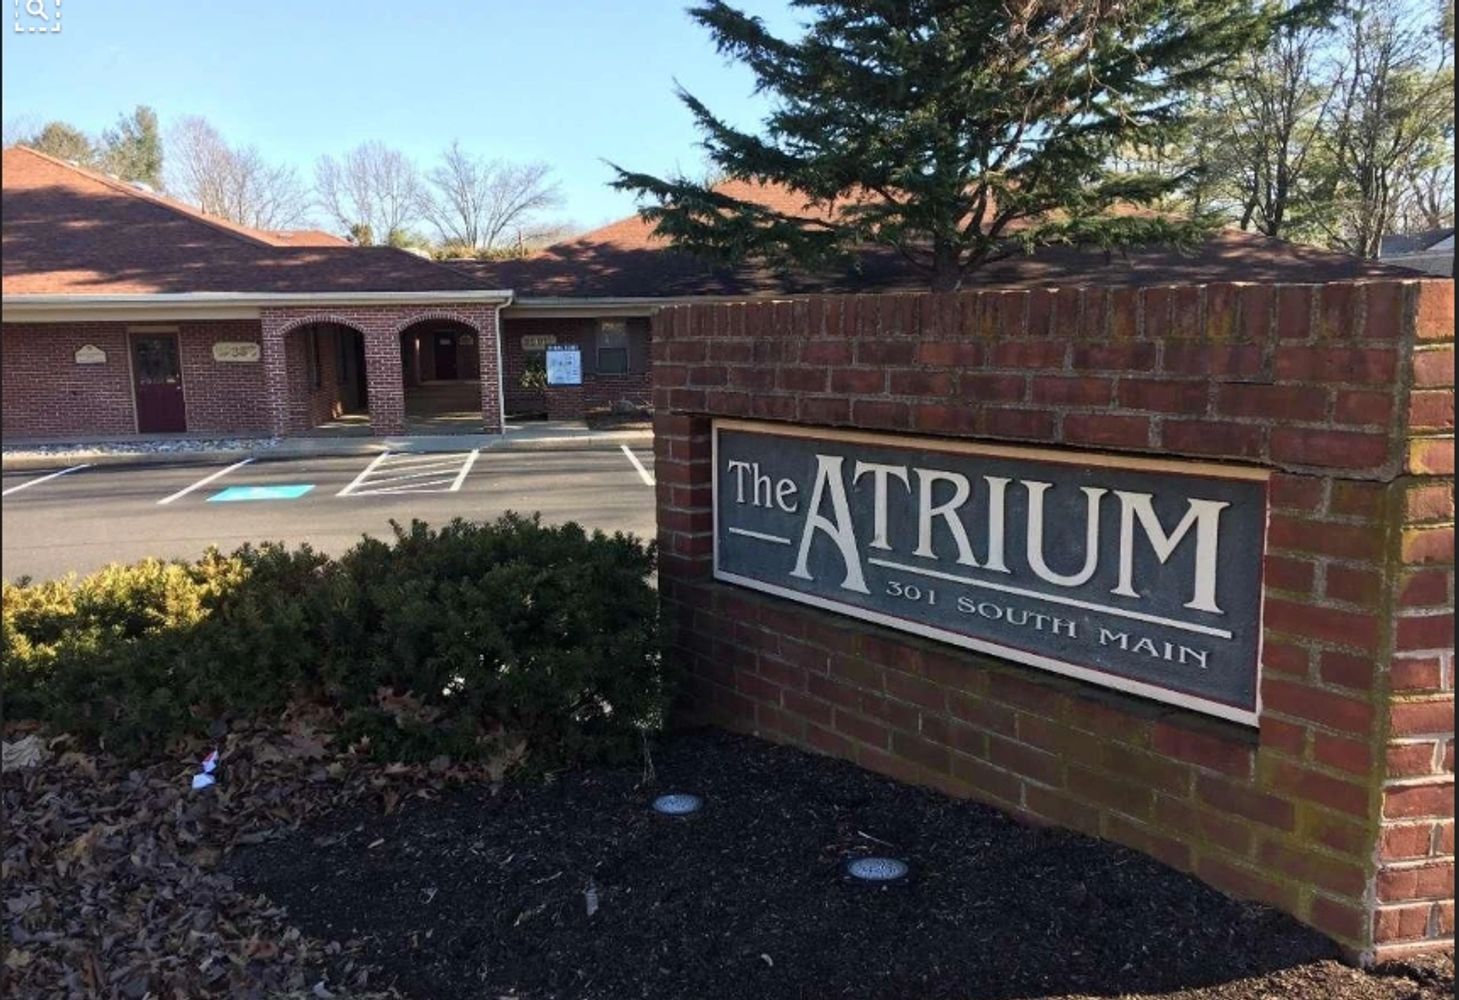 A blue sign with the words "The Atrium 301 South Main" on a brick wall in front of a parking lot.